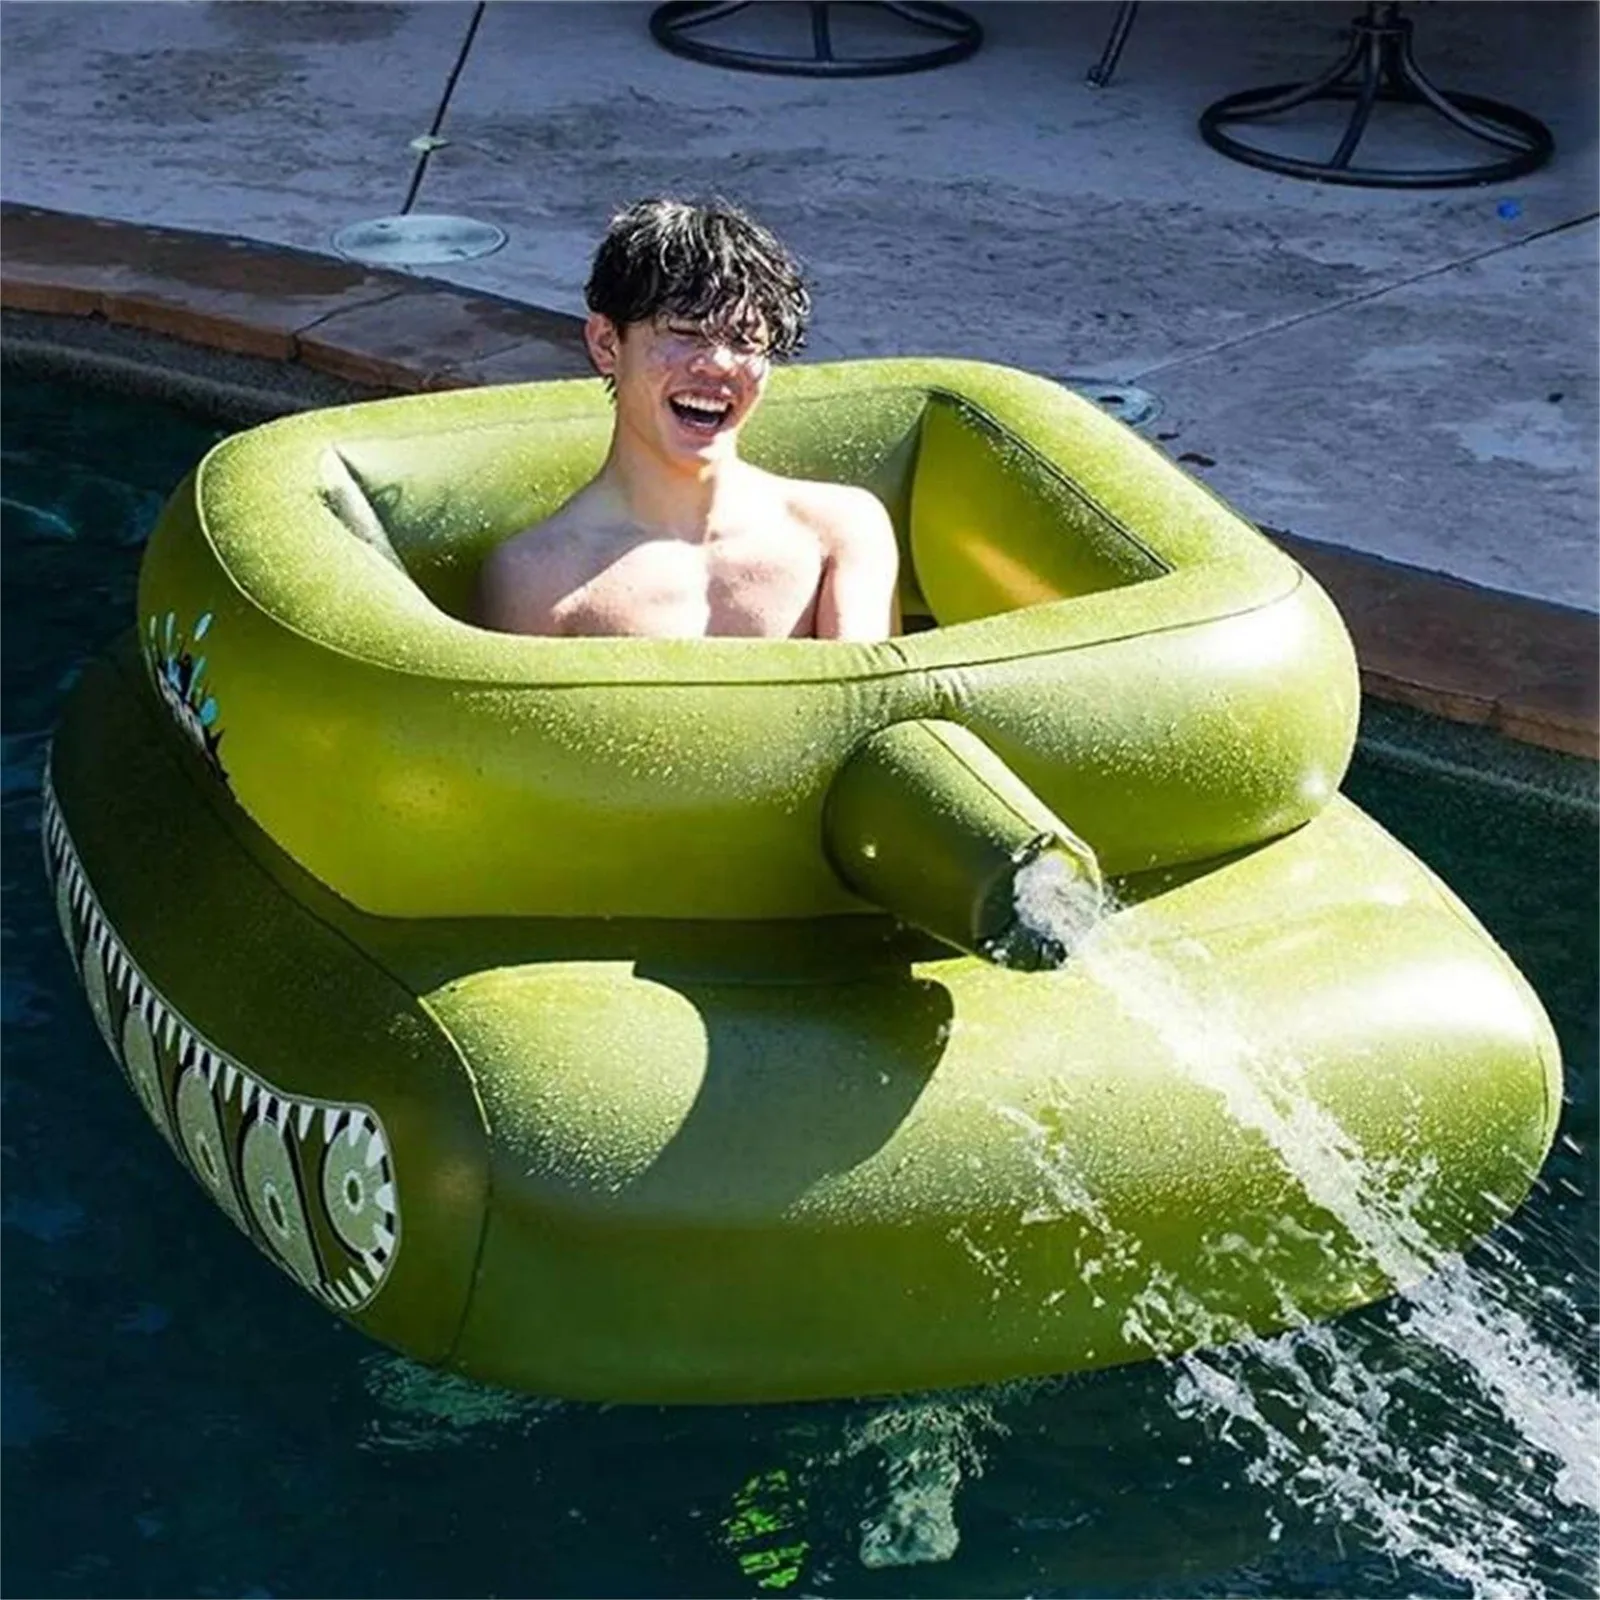 

New Inflatable Tank Pool Floats Lounger Bed Chair Swimming Circle Outdoor Ride-ons Toys For Adults Kids Funny Beach Rafts Party